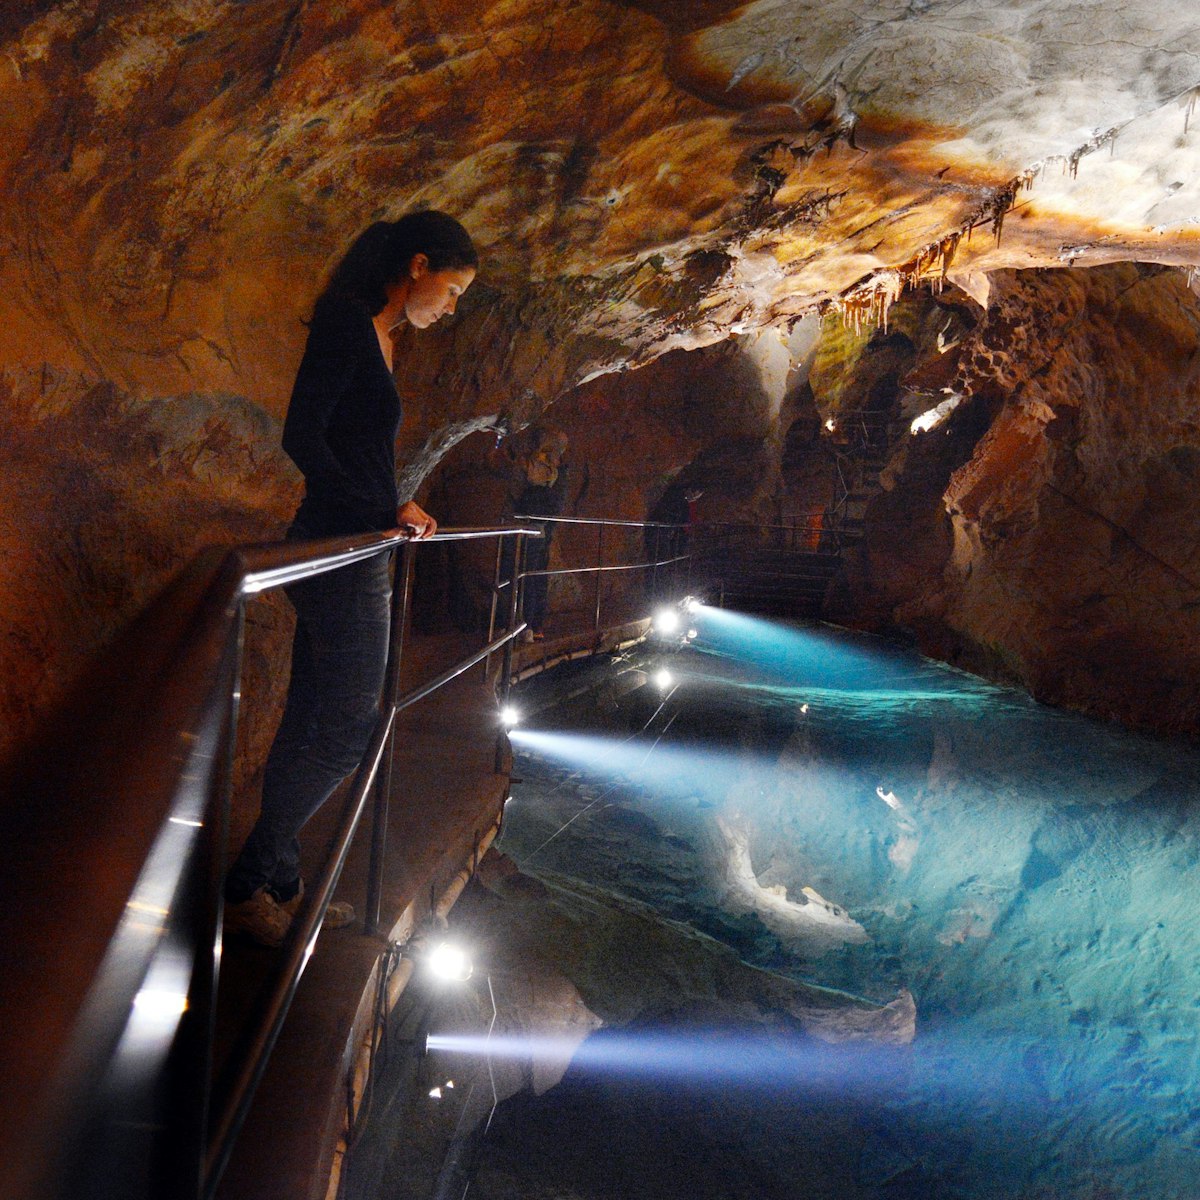 Woman looks at the water pool in River Cave at the Jenolan Caves at the Blue Mountains of New South Wales, Australia.